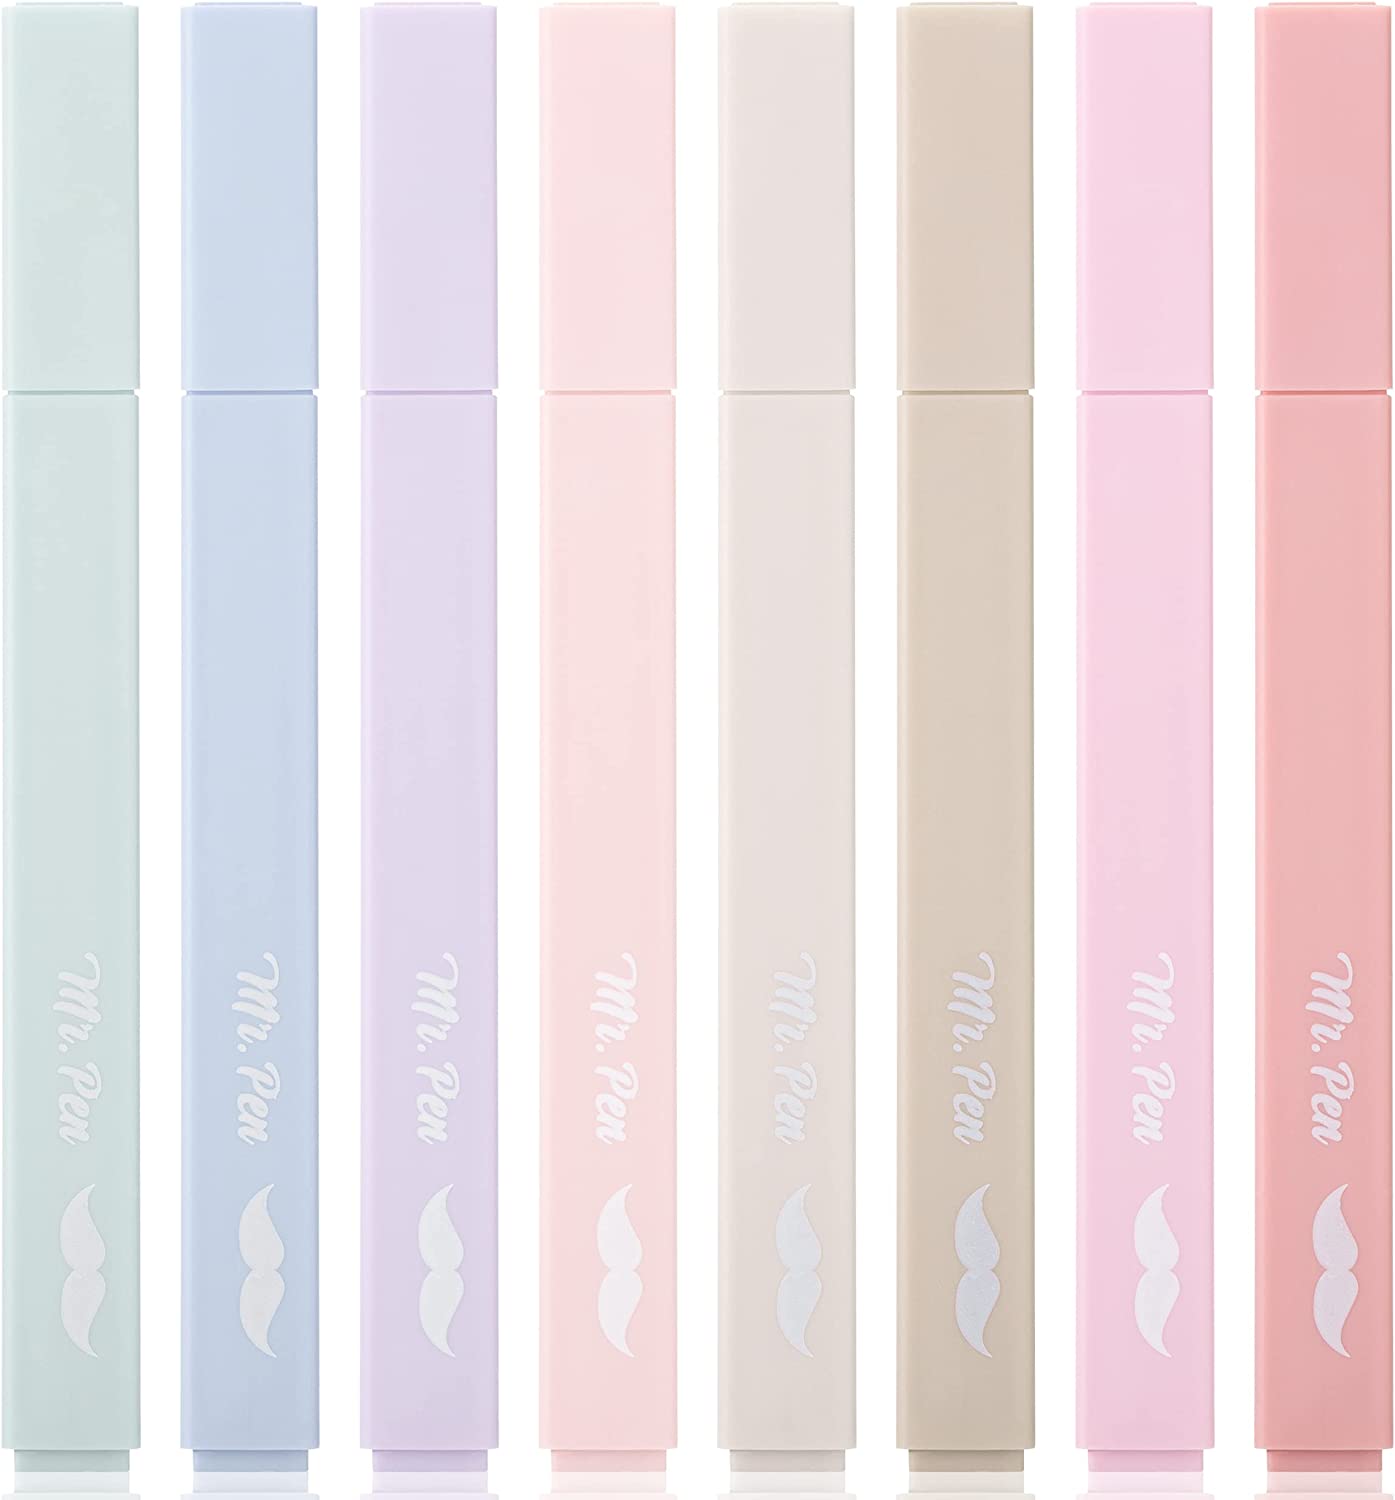 Mr. Pen- Aesthetic Highlighters, 8 Pcs, Chisel Tip, Muted Pastel Color,  Assorted Color Highlighter Set 